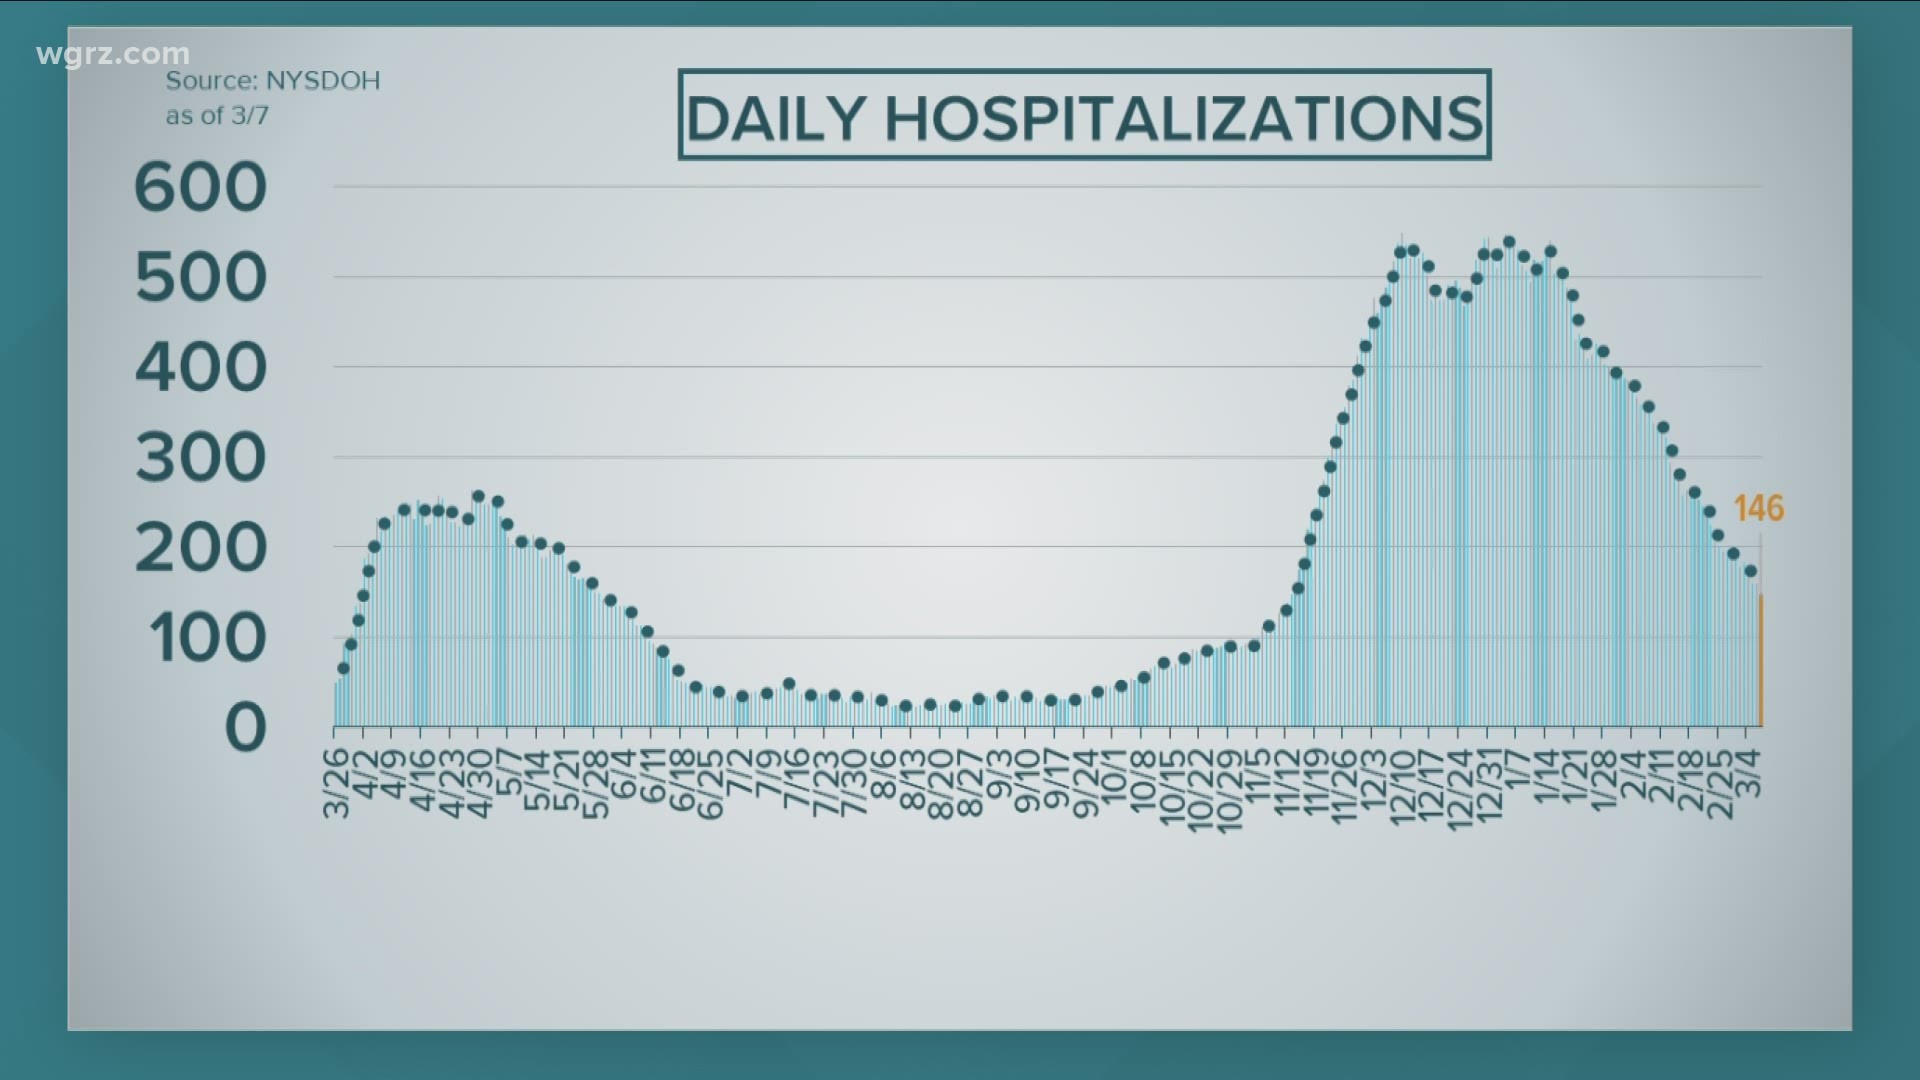 When we take a look at the latest hospitalization numbers for the Western New York region, the number of people hospitalized with Covid-19 dropped to 146 on Sunday.